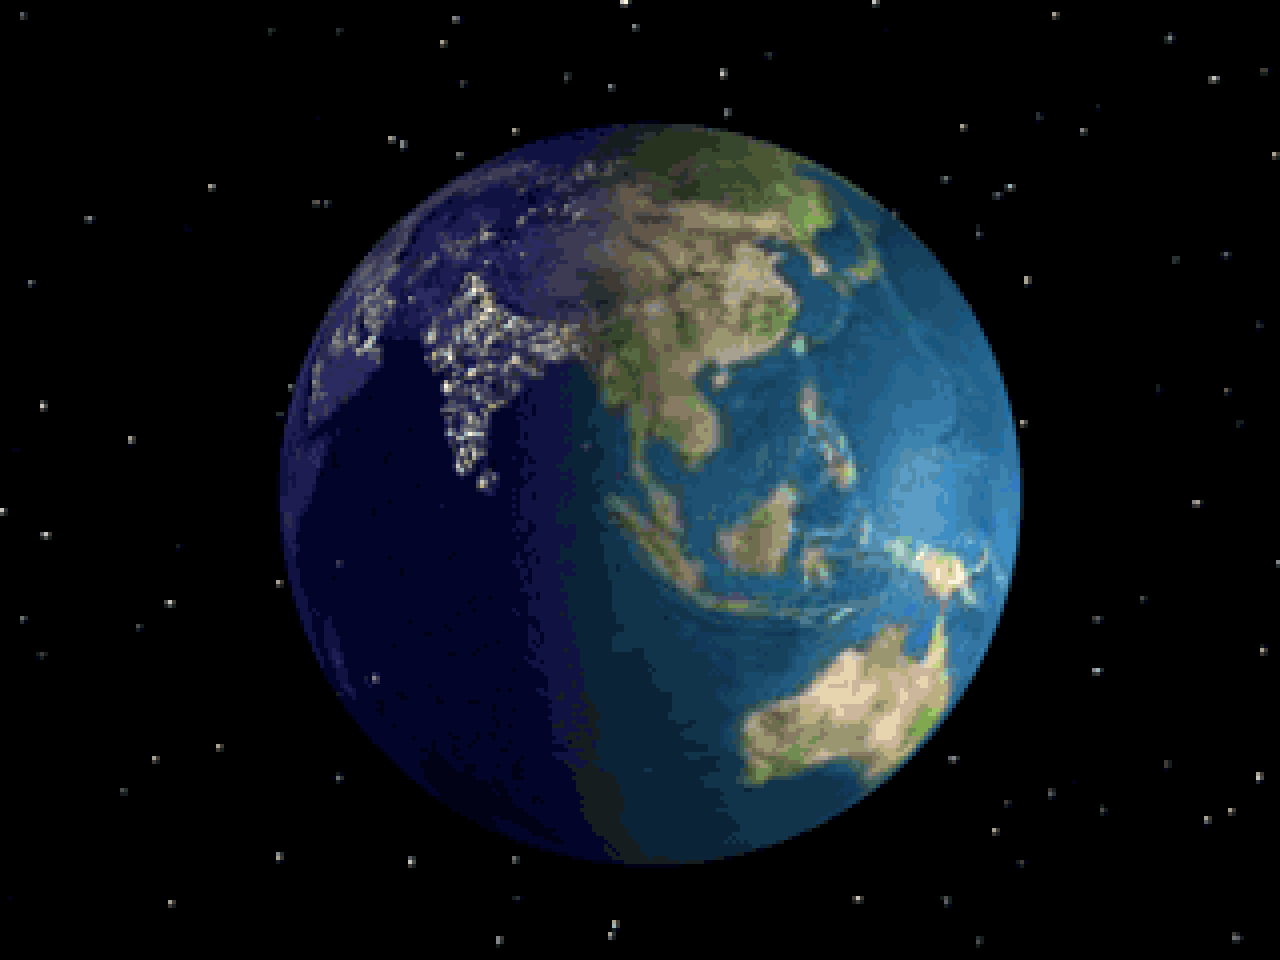 animation earth spinning